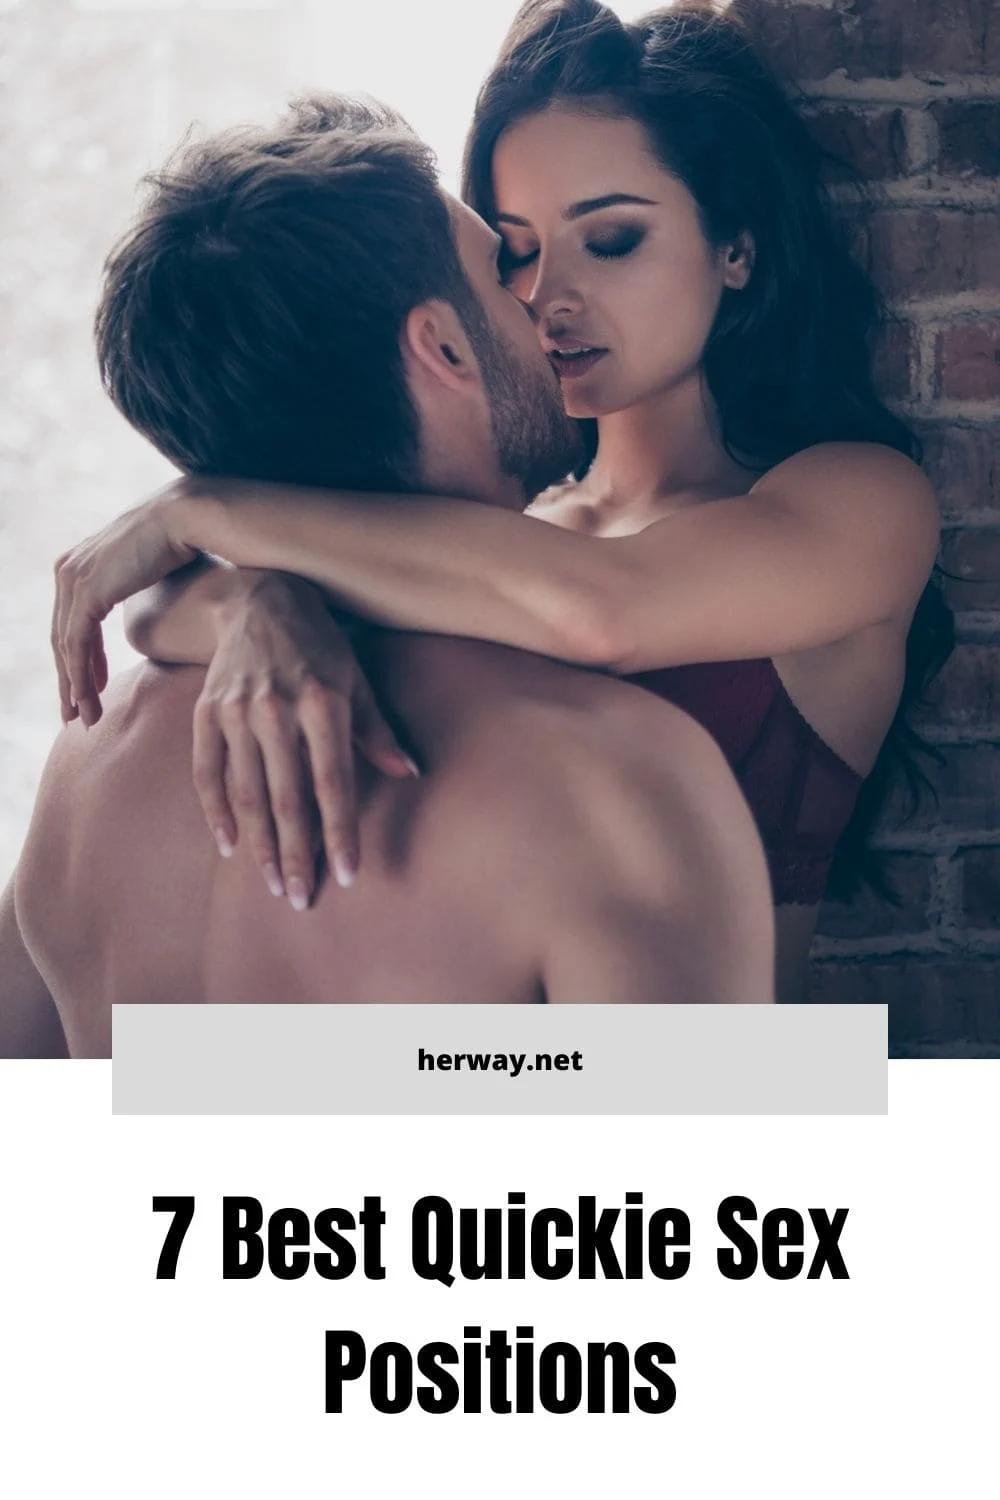 7 Best Quickie Sex Positions